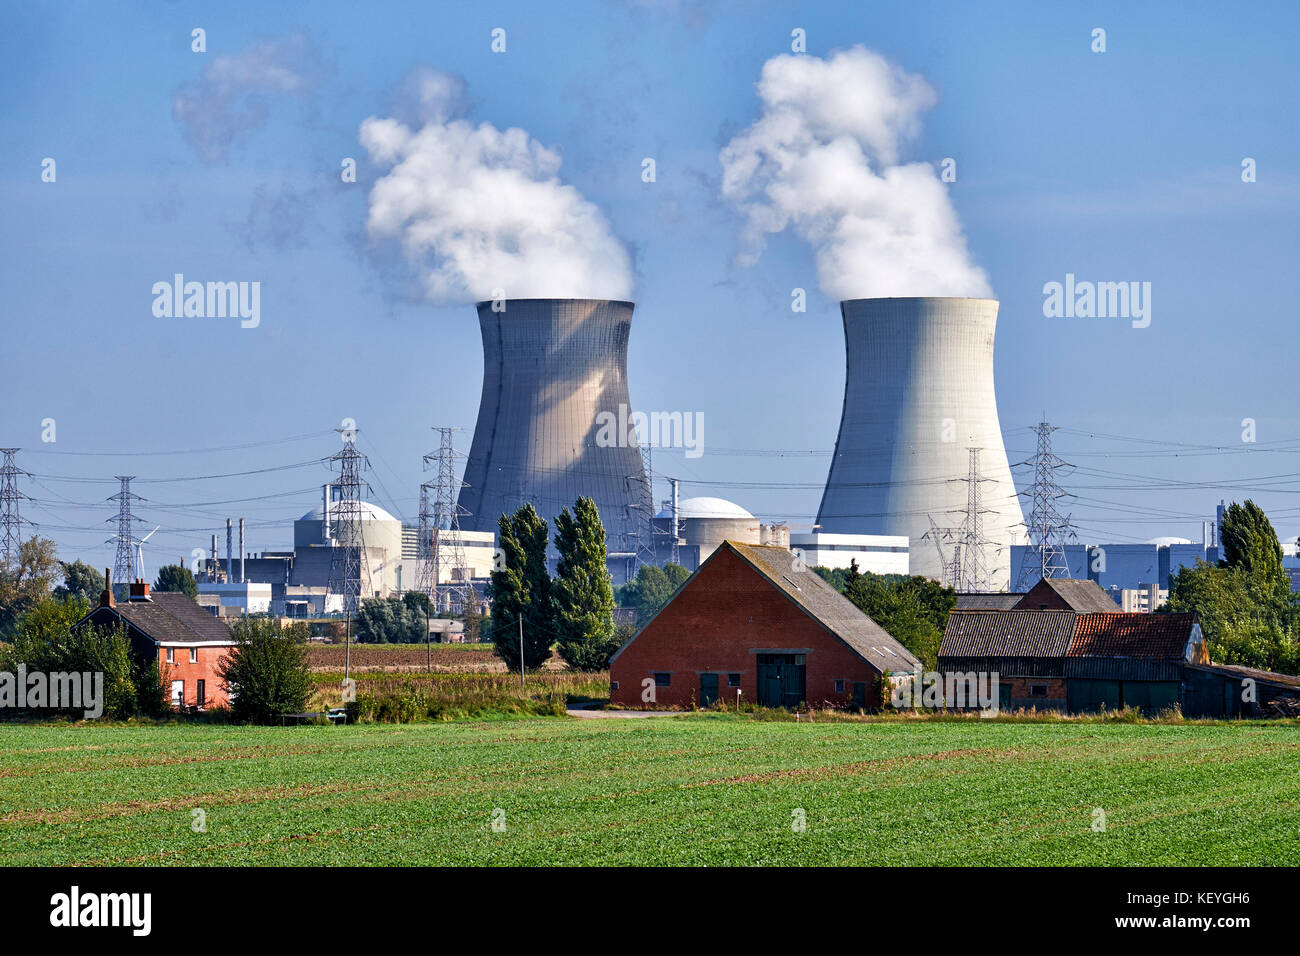 Steam rising from the two cooling towers of the  Nuclear Power Plant at the small village if Doel in Flanders, Belgium very close to the Dutch border Stock Photo